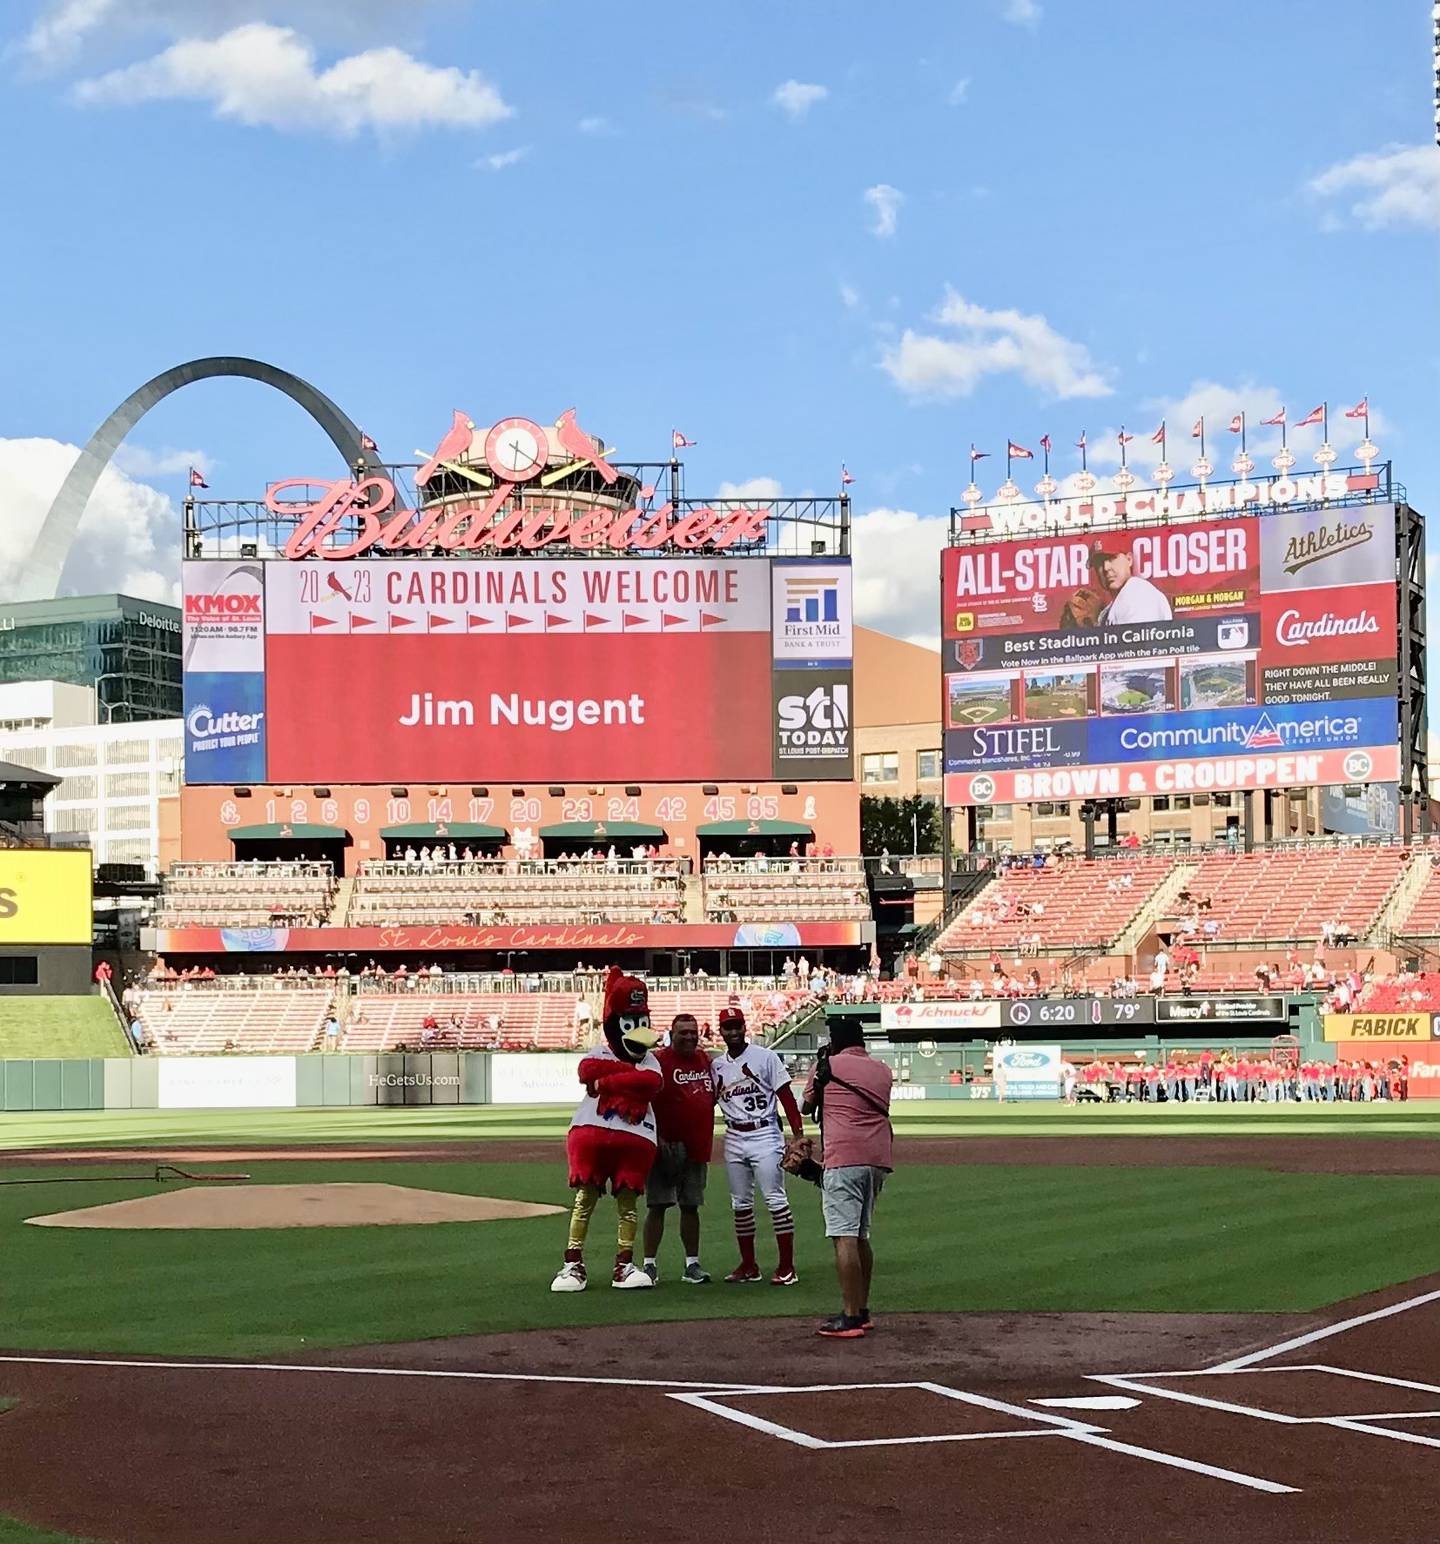 Bureau Valley K-5 PE teacher Jim Nugent was welcomed by the St. Louis Cardinals to throw out the first pitch for Monday's game by Fredbird and Cardinals infielder Jose Fermin.